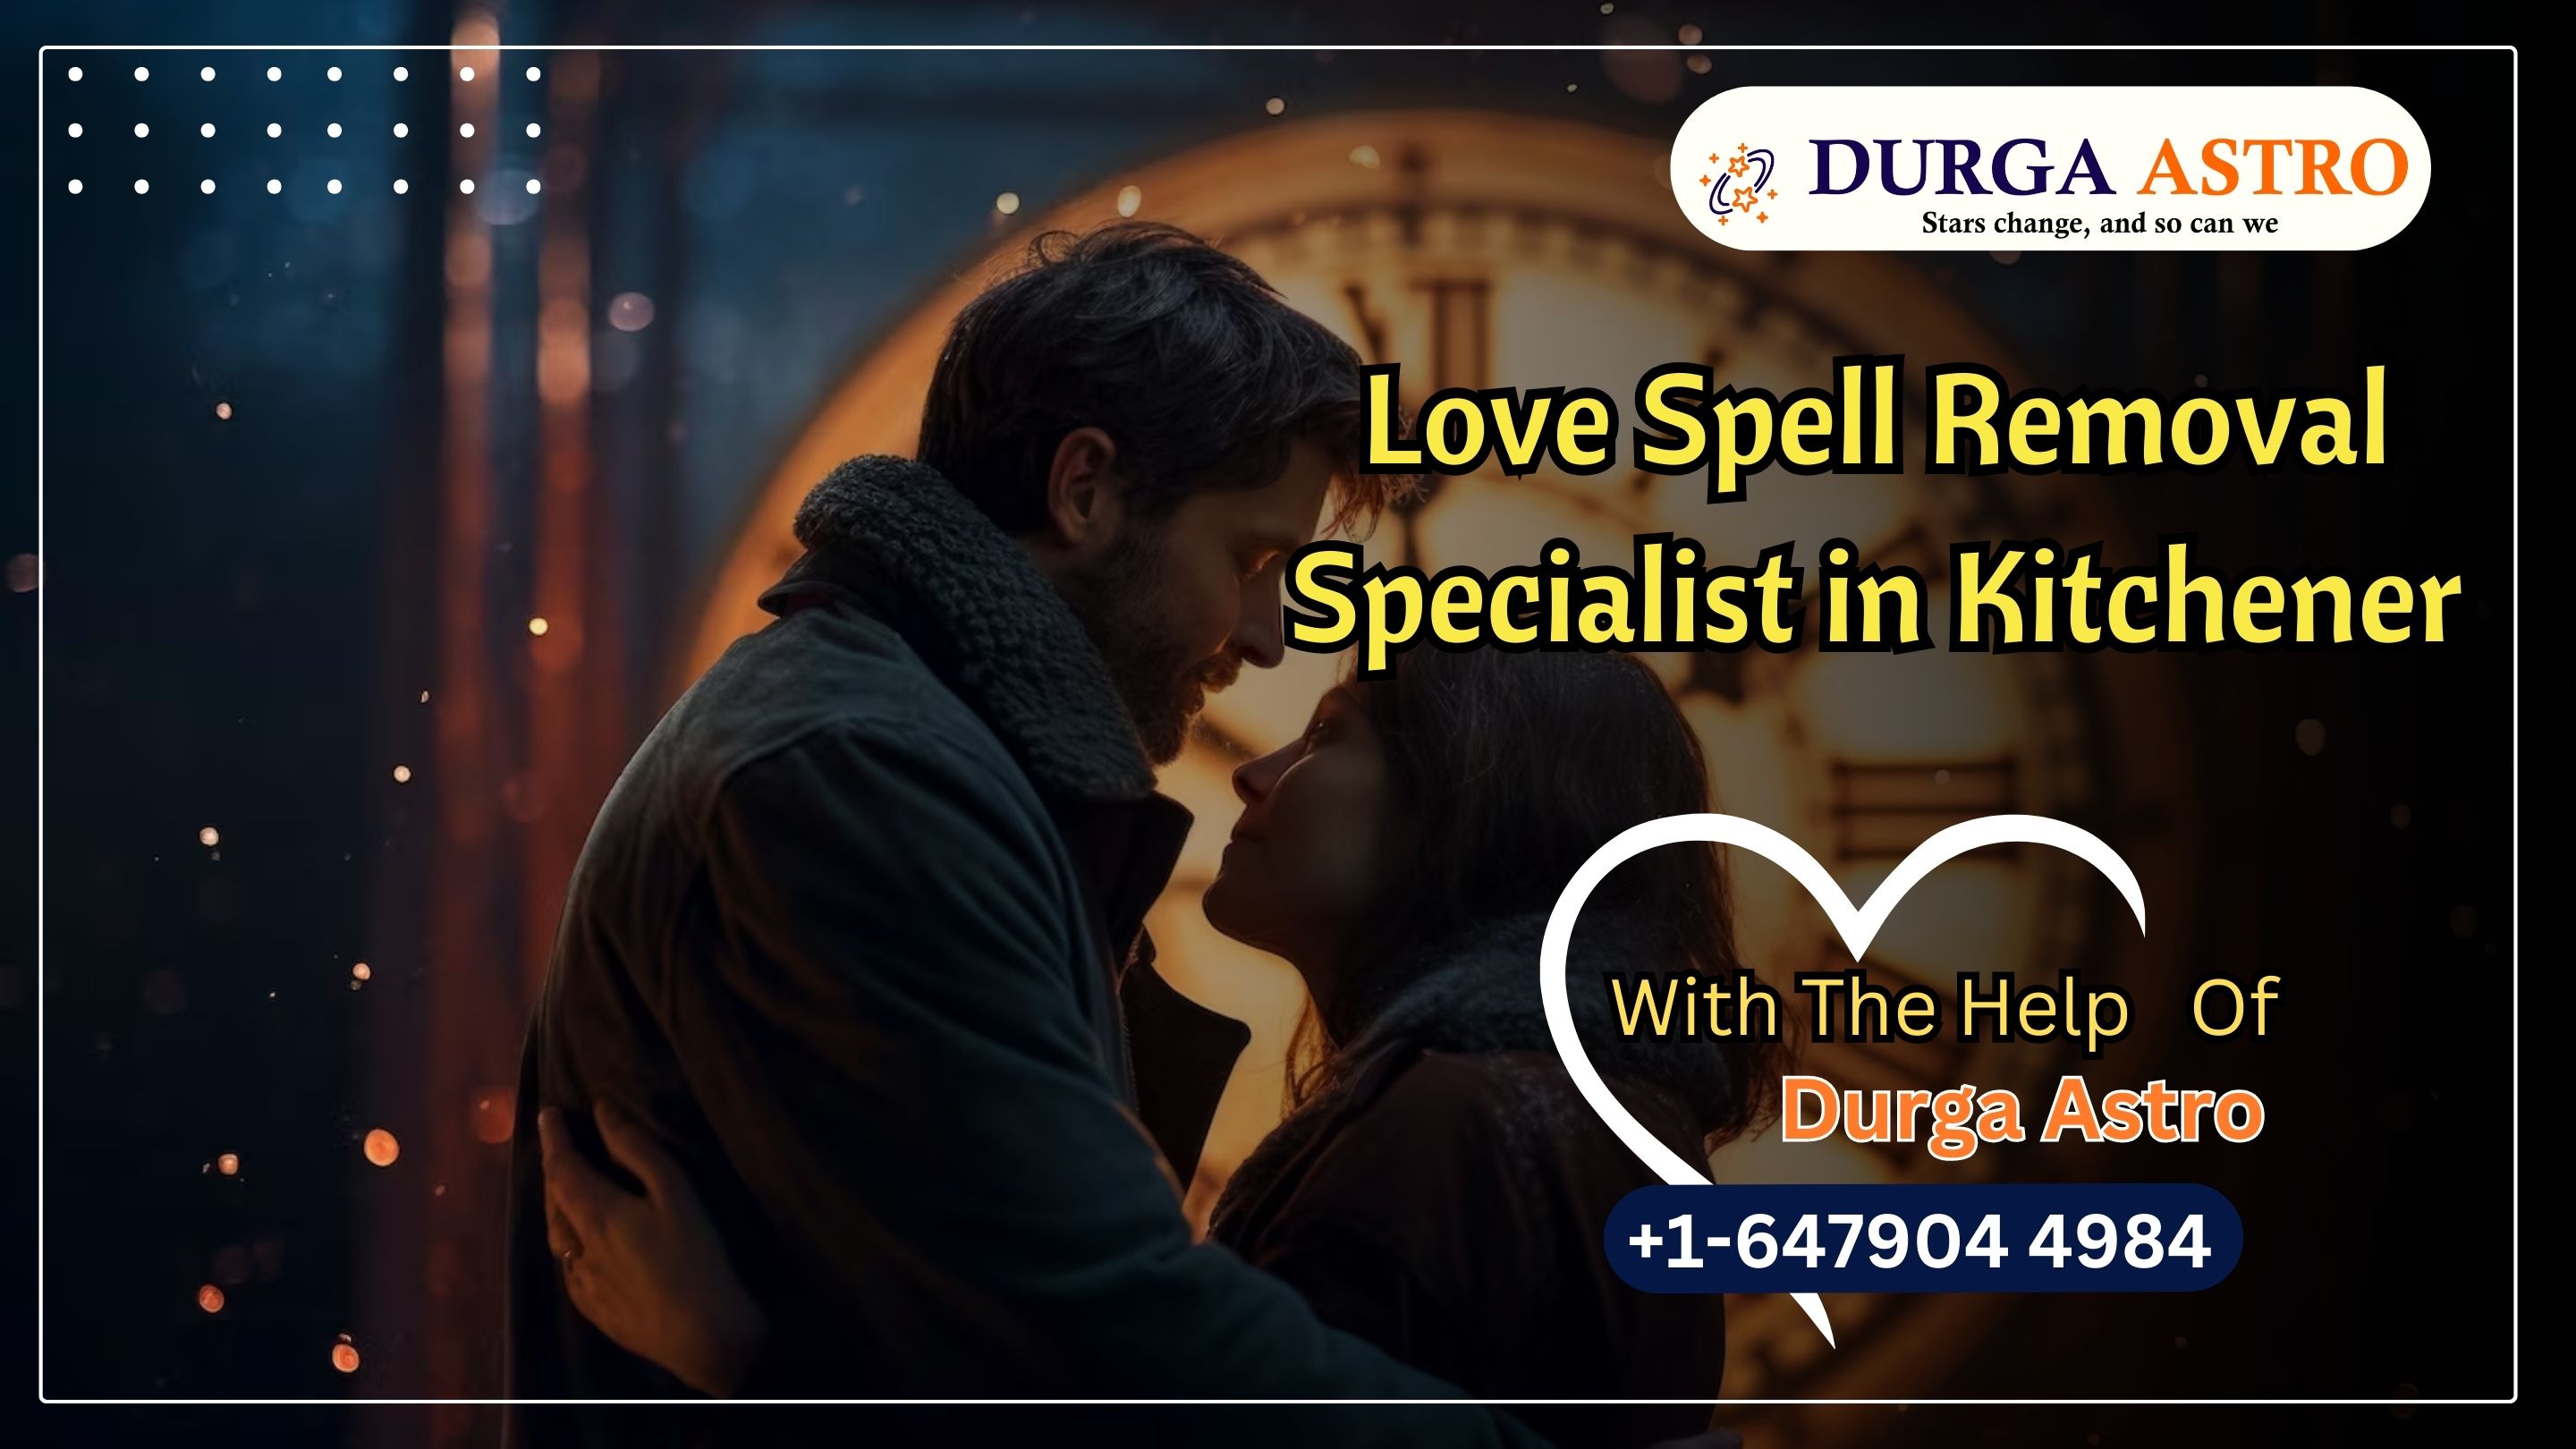 Love Spell Removal Specialist in Kitchener